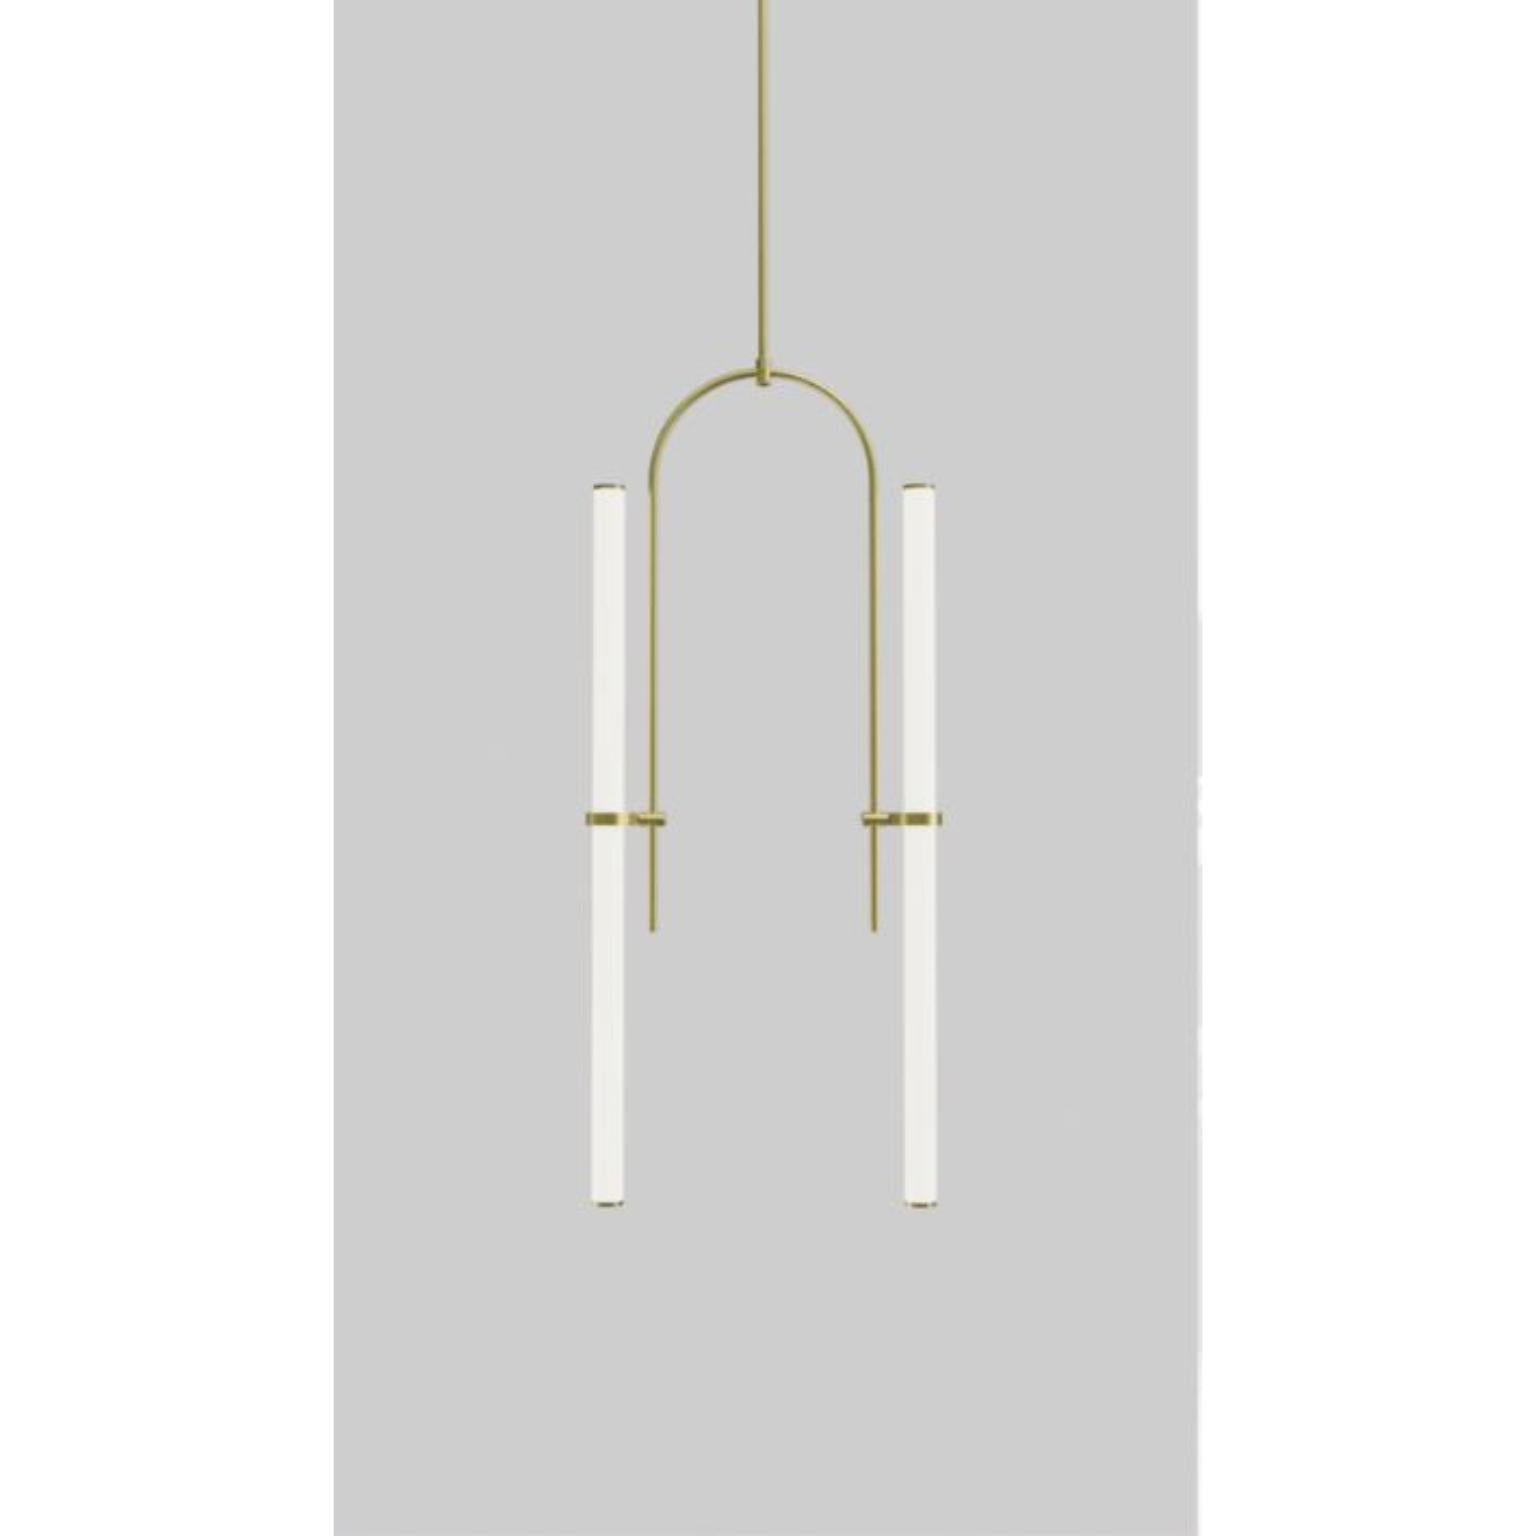 Light Object 024 by Naama Hofman
Dimensions: W 4 x D 39 x H 96 cm
Material: brass, acrylic tube, LED lights
Weight:2.5 kg / 5.5 lbs

Suspension:
DIA 1 cm / 0.4 In brass stem in matching finish.
Height to order.
Maximum length 2 m.

Canopy:
DIA 21 cm